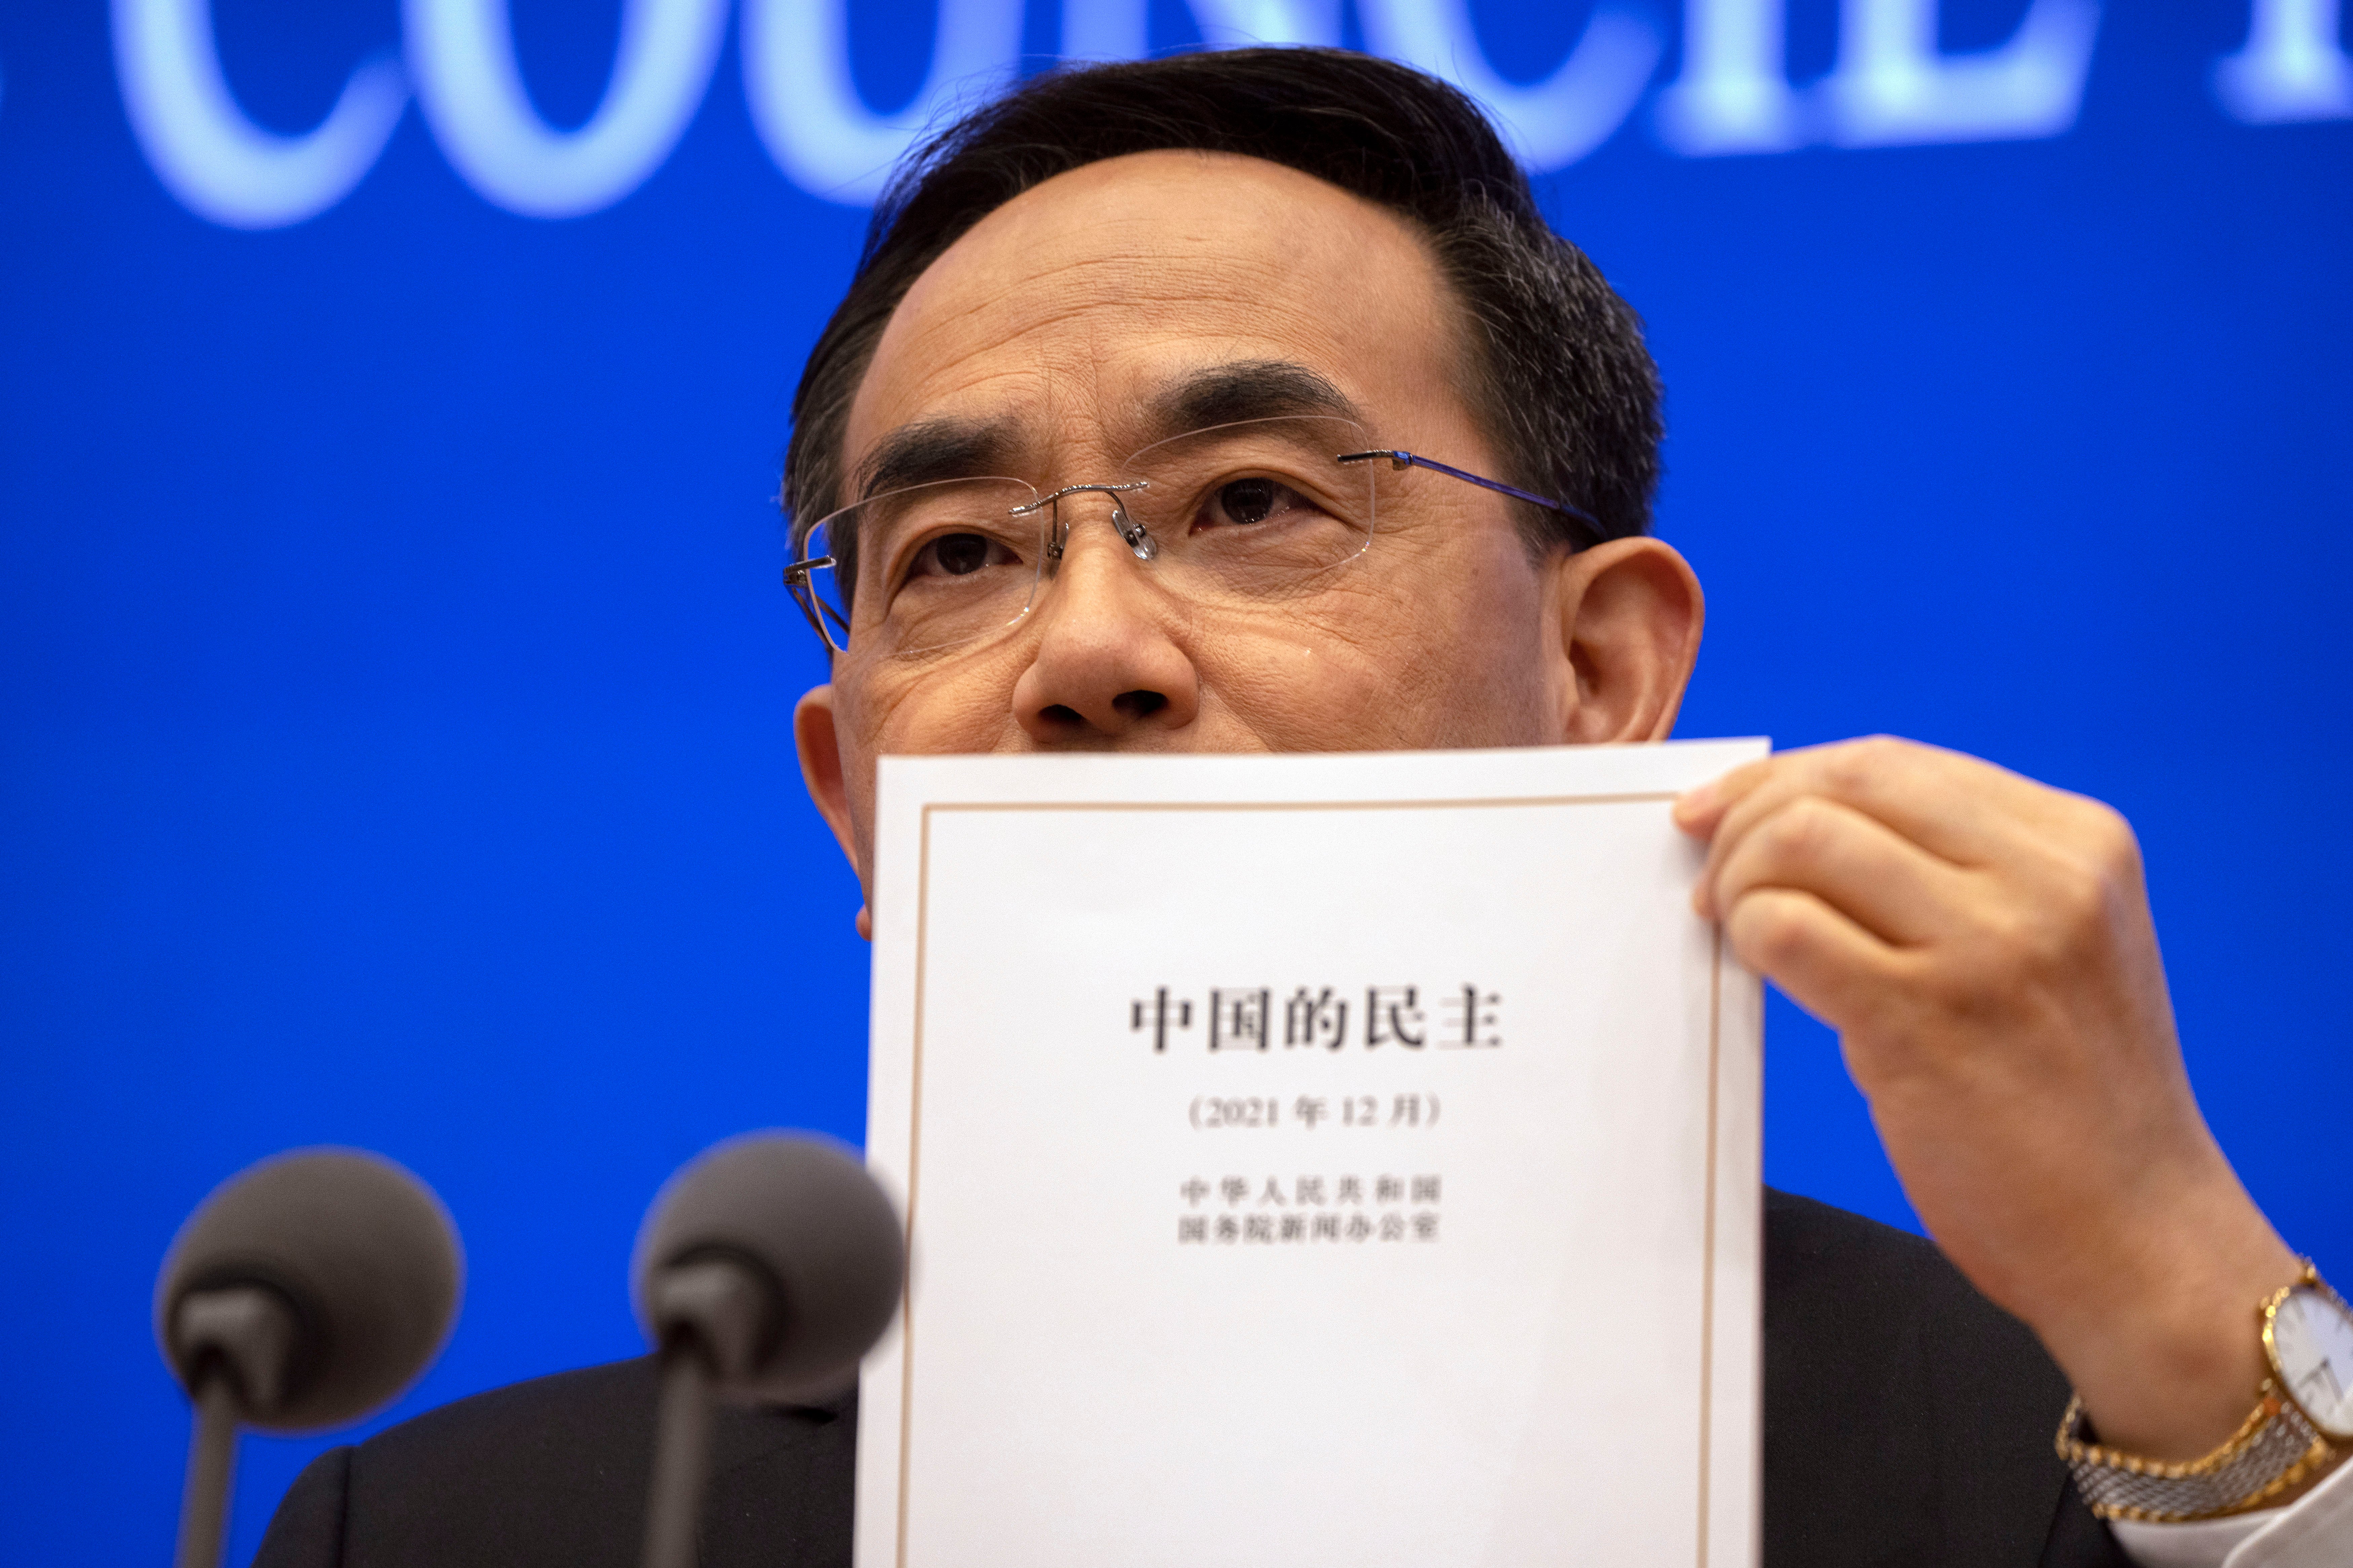 Xu Lin, vice minister of the publicity department of the central committee of China’s Communist Party holds a copy of a government-produced report titled “Democracy that Works” in Beijing on Saturday